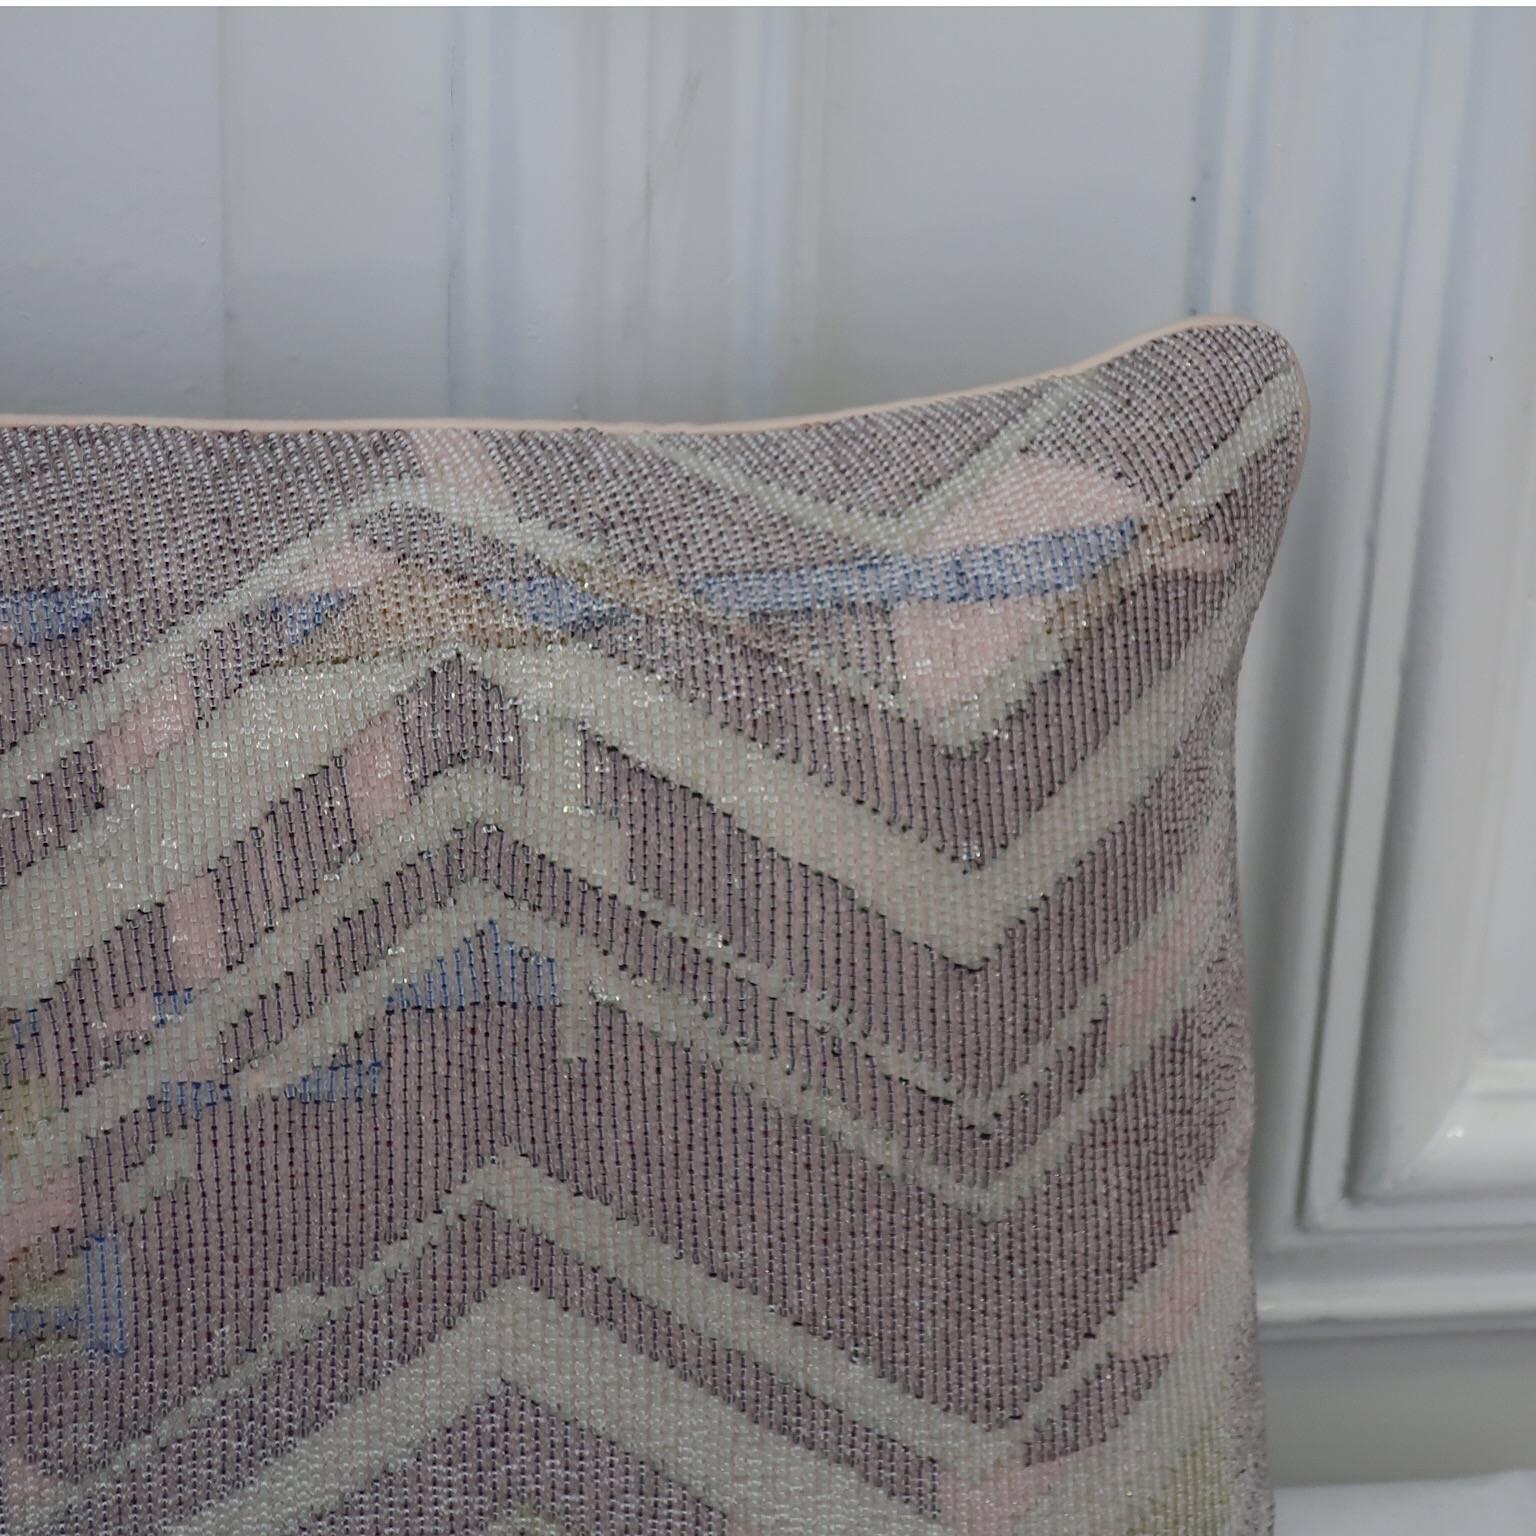 English Handcrafted Embroidered Beaded Textile Pillow Geometric Design For Sale